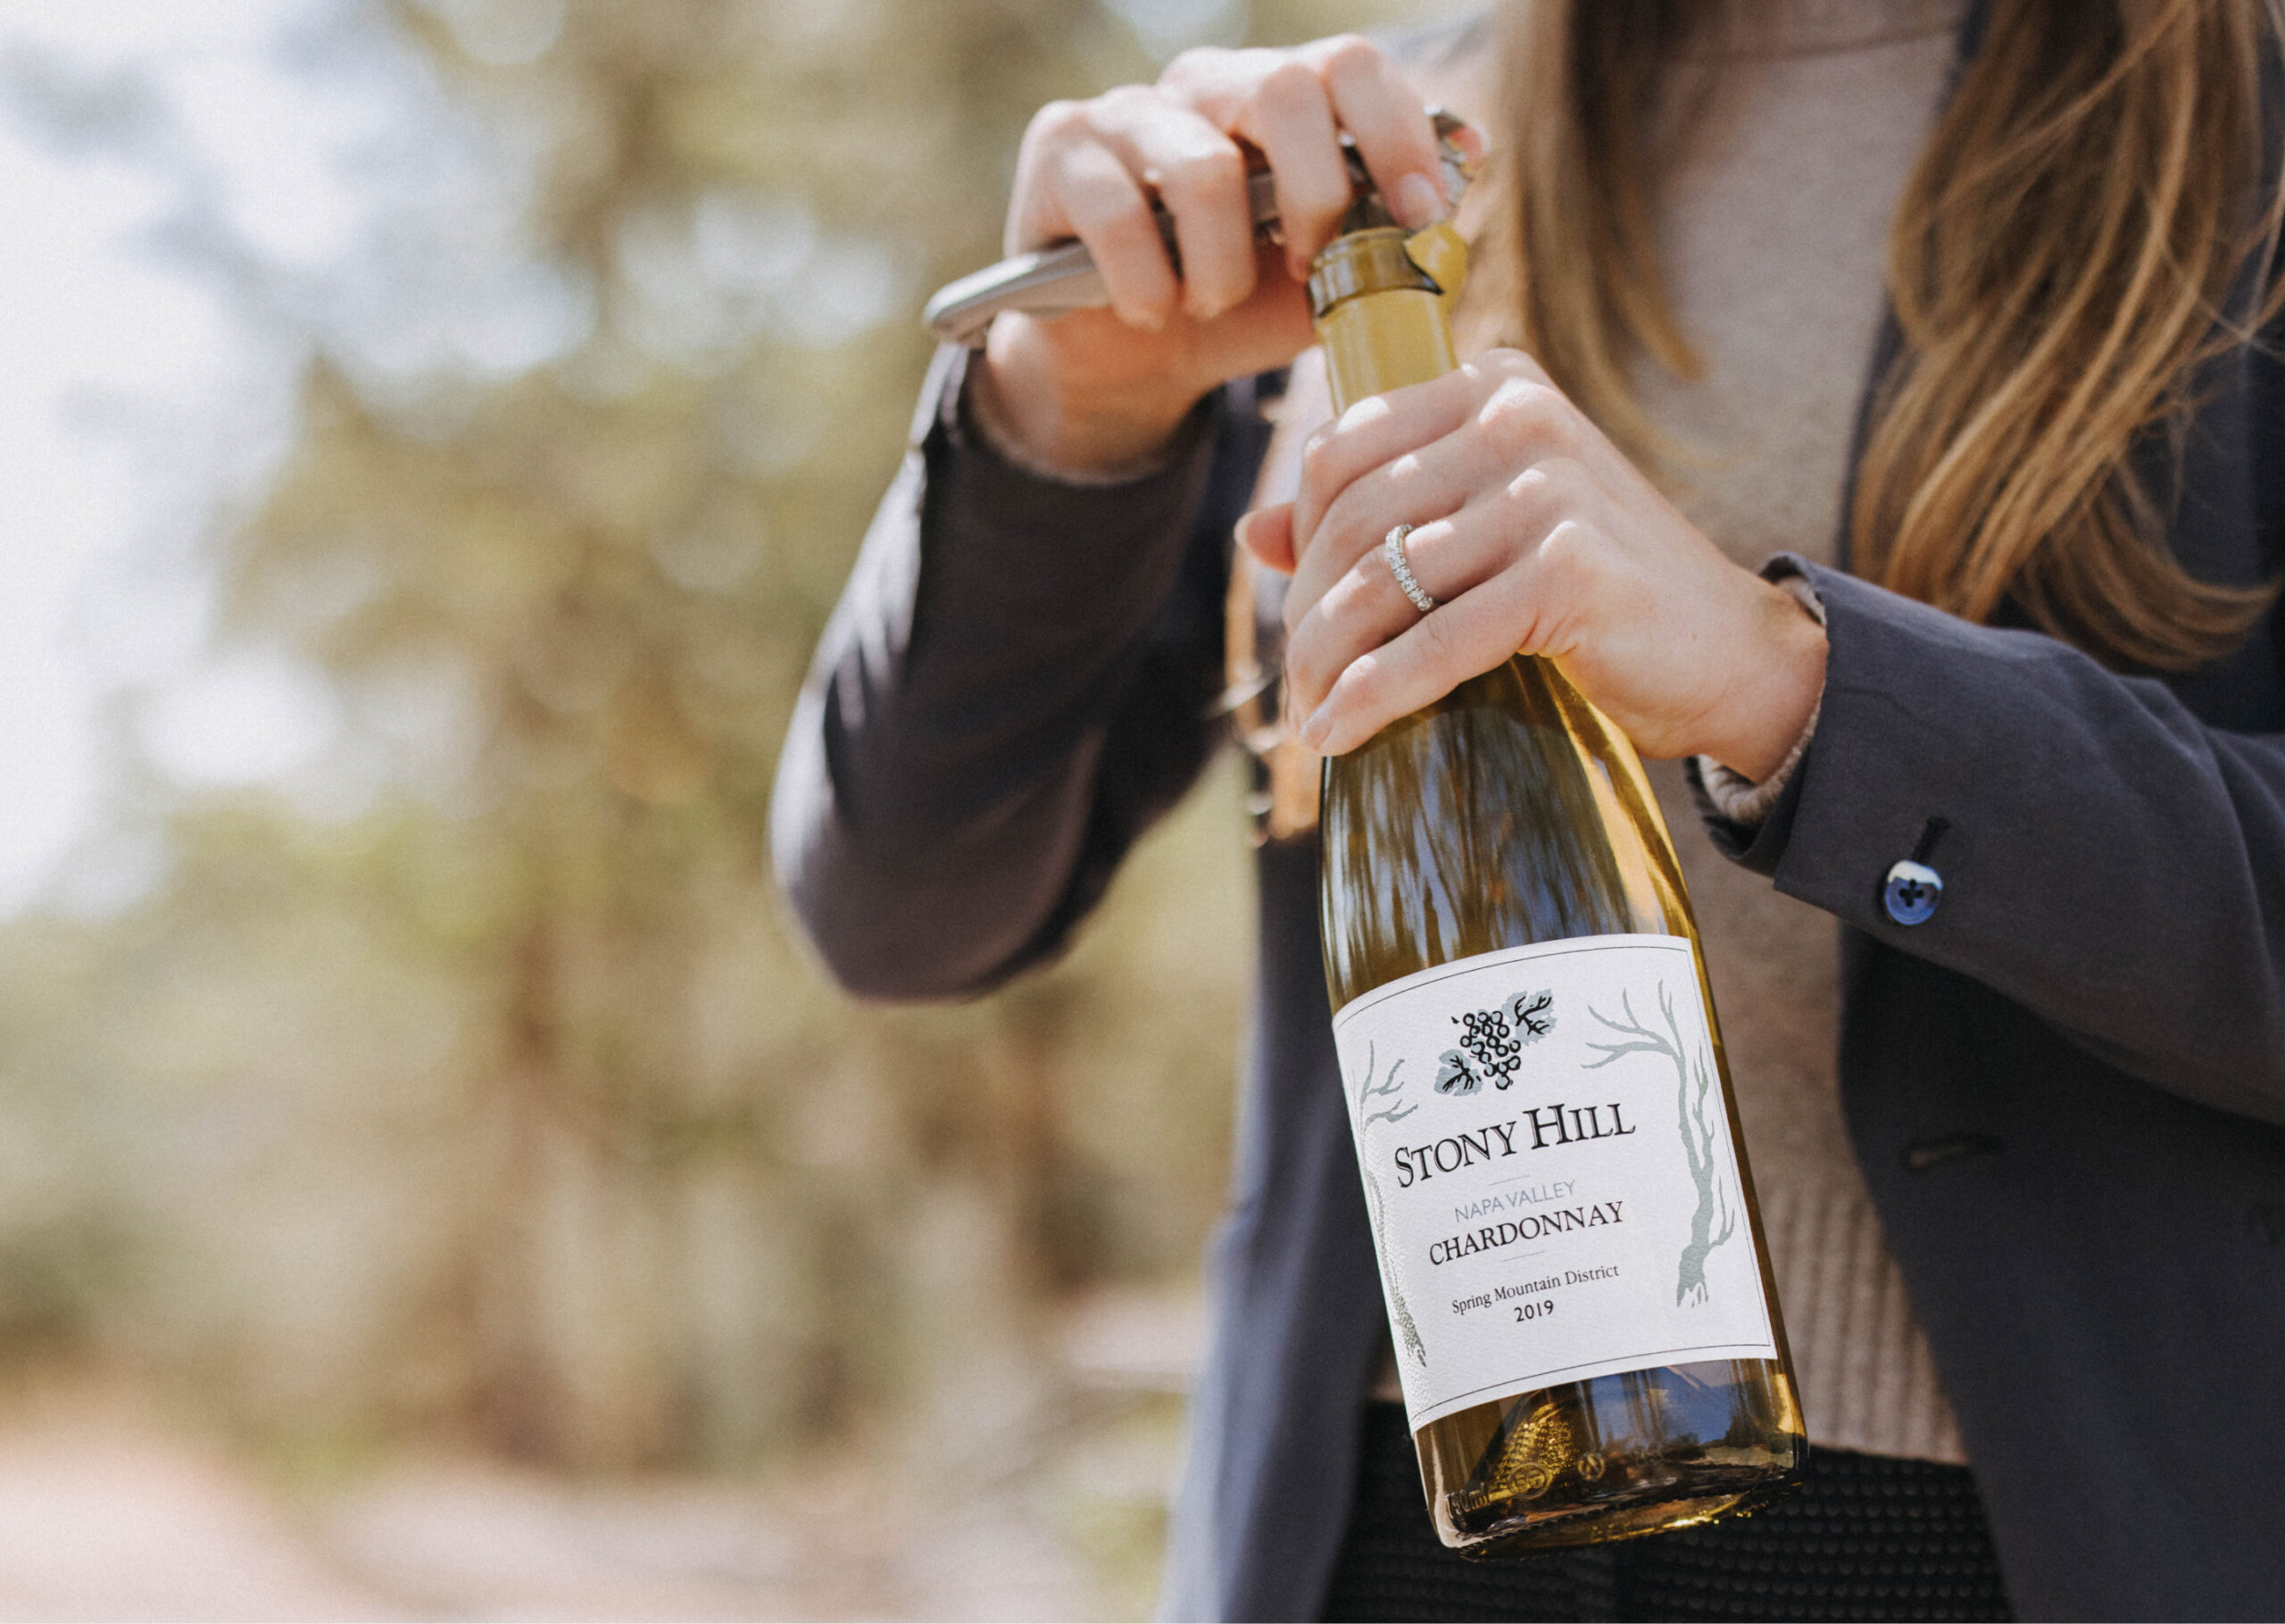 A woman opening a bottle of Stony Hill Chardonnay outdoors in the vineyard.